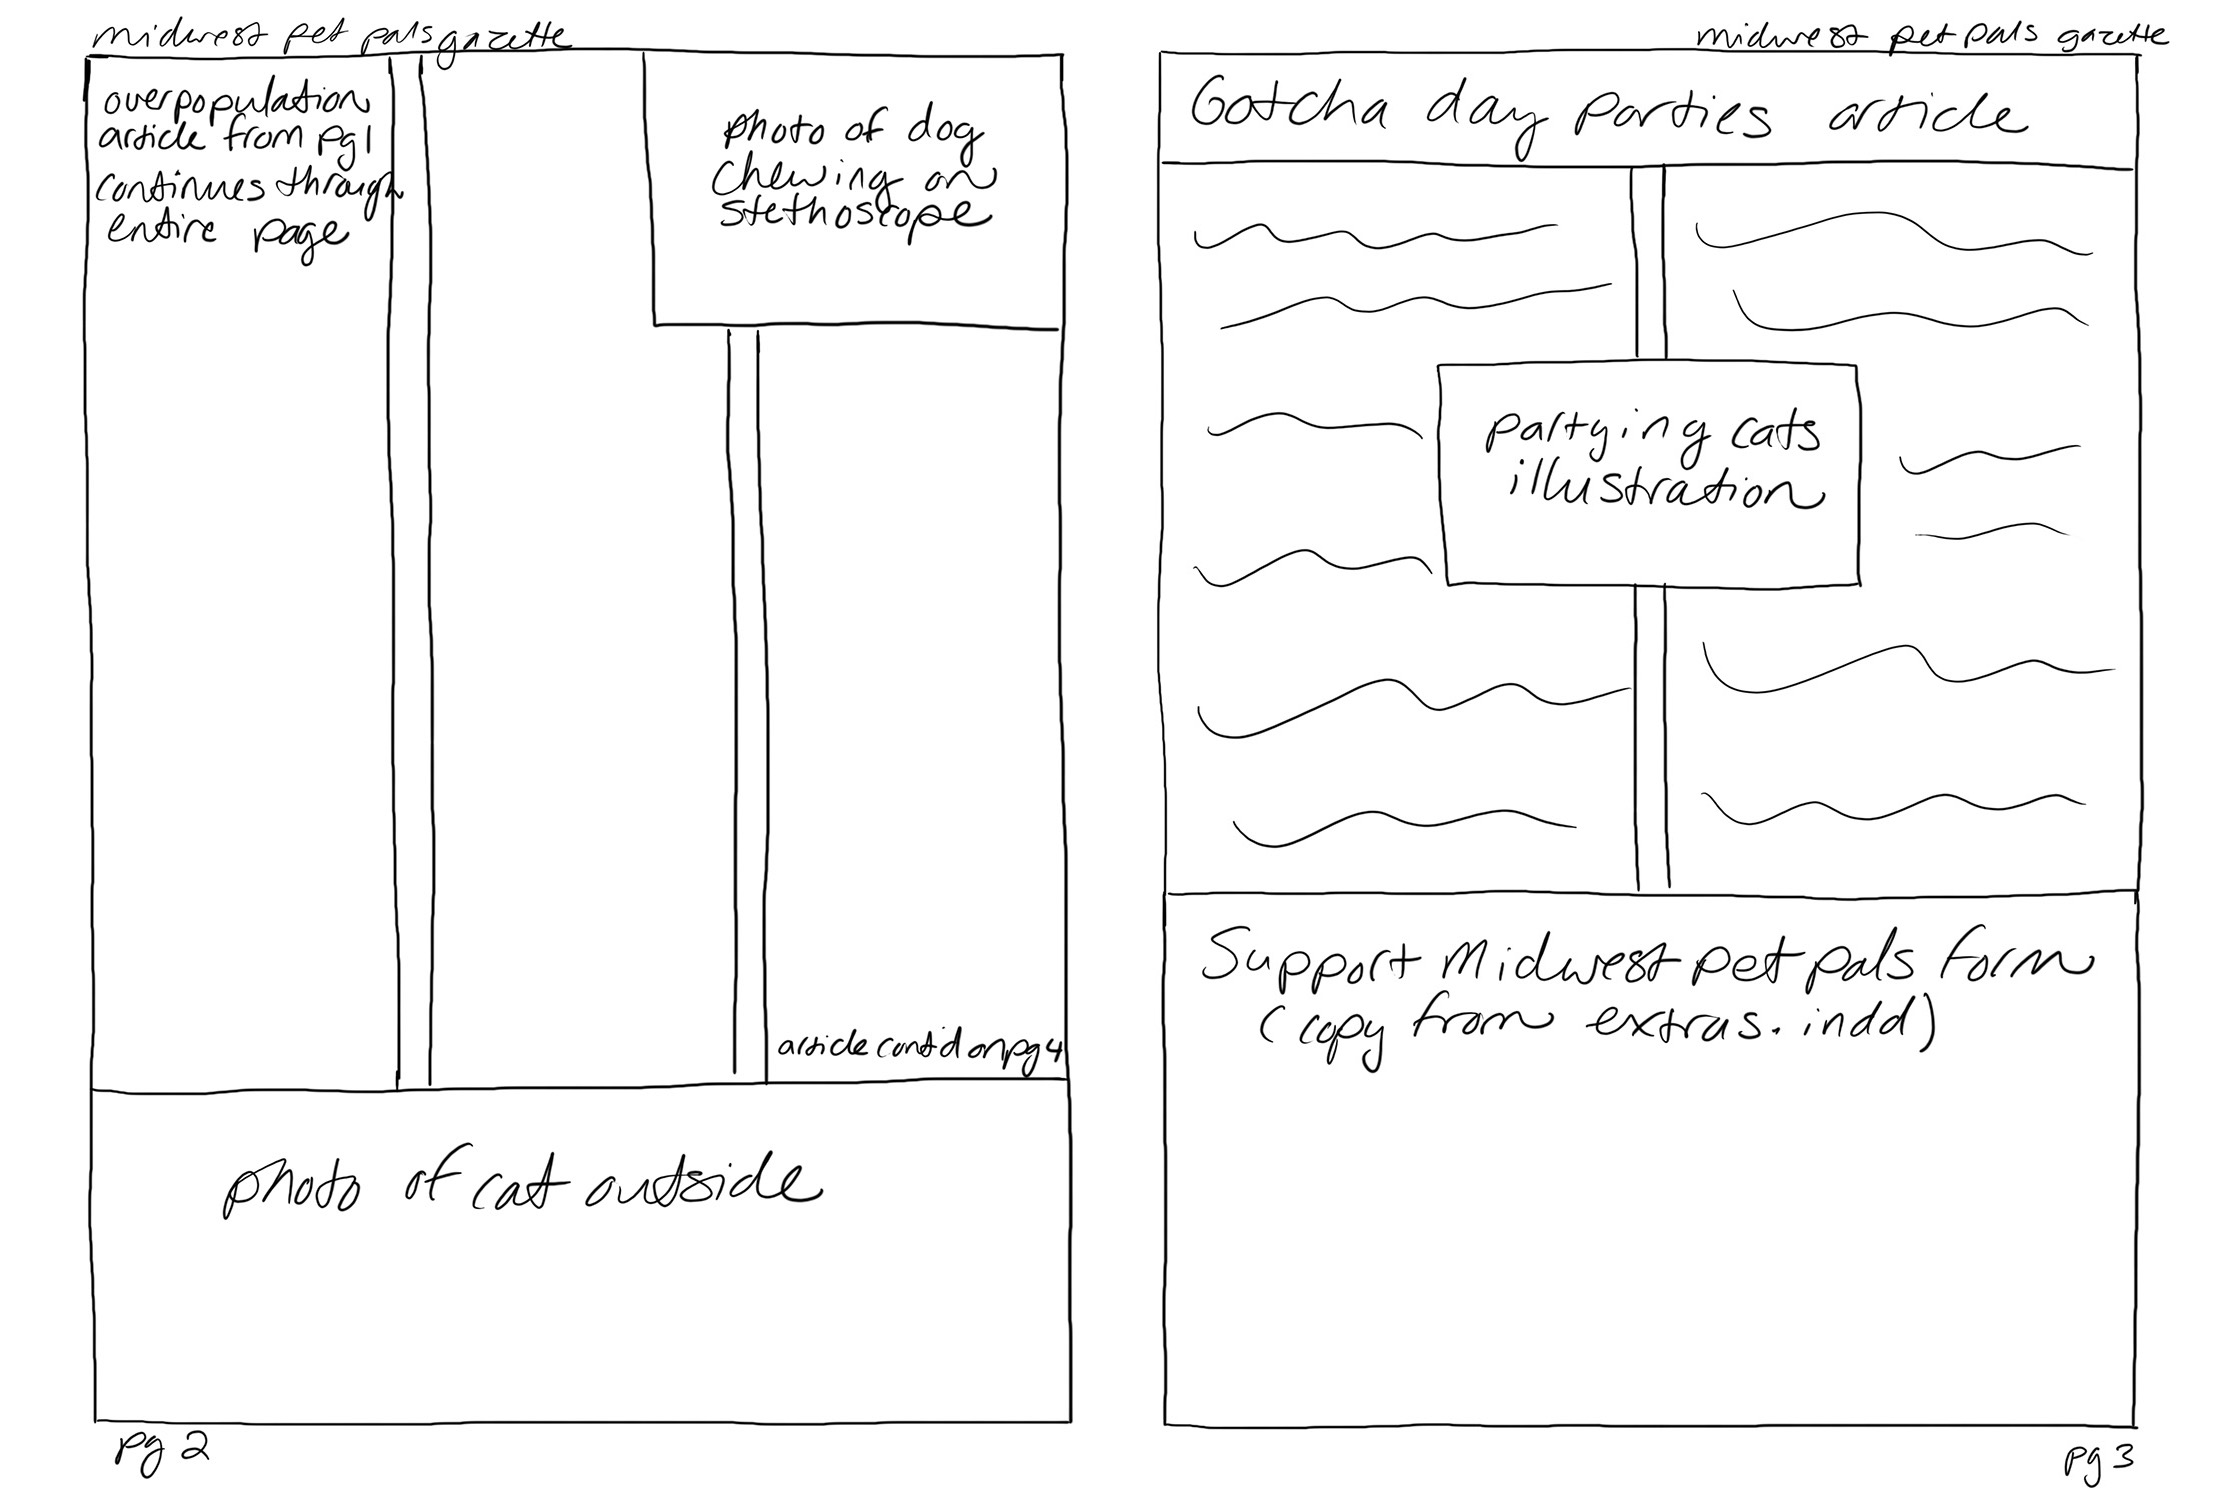 Rough sketch of pages 2 and 3 next to each other. Page 2 consists of a continuation of the main article from the front page, with rectangles marking out where images will go. Page 3 is split into two parts - the top two-thirds of the page is dedicated to the Gotcha day parties article, with a placeholder for an illustration of partying cats. The bottom third of the page contains a donation form.